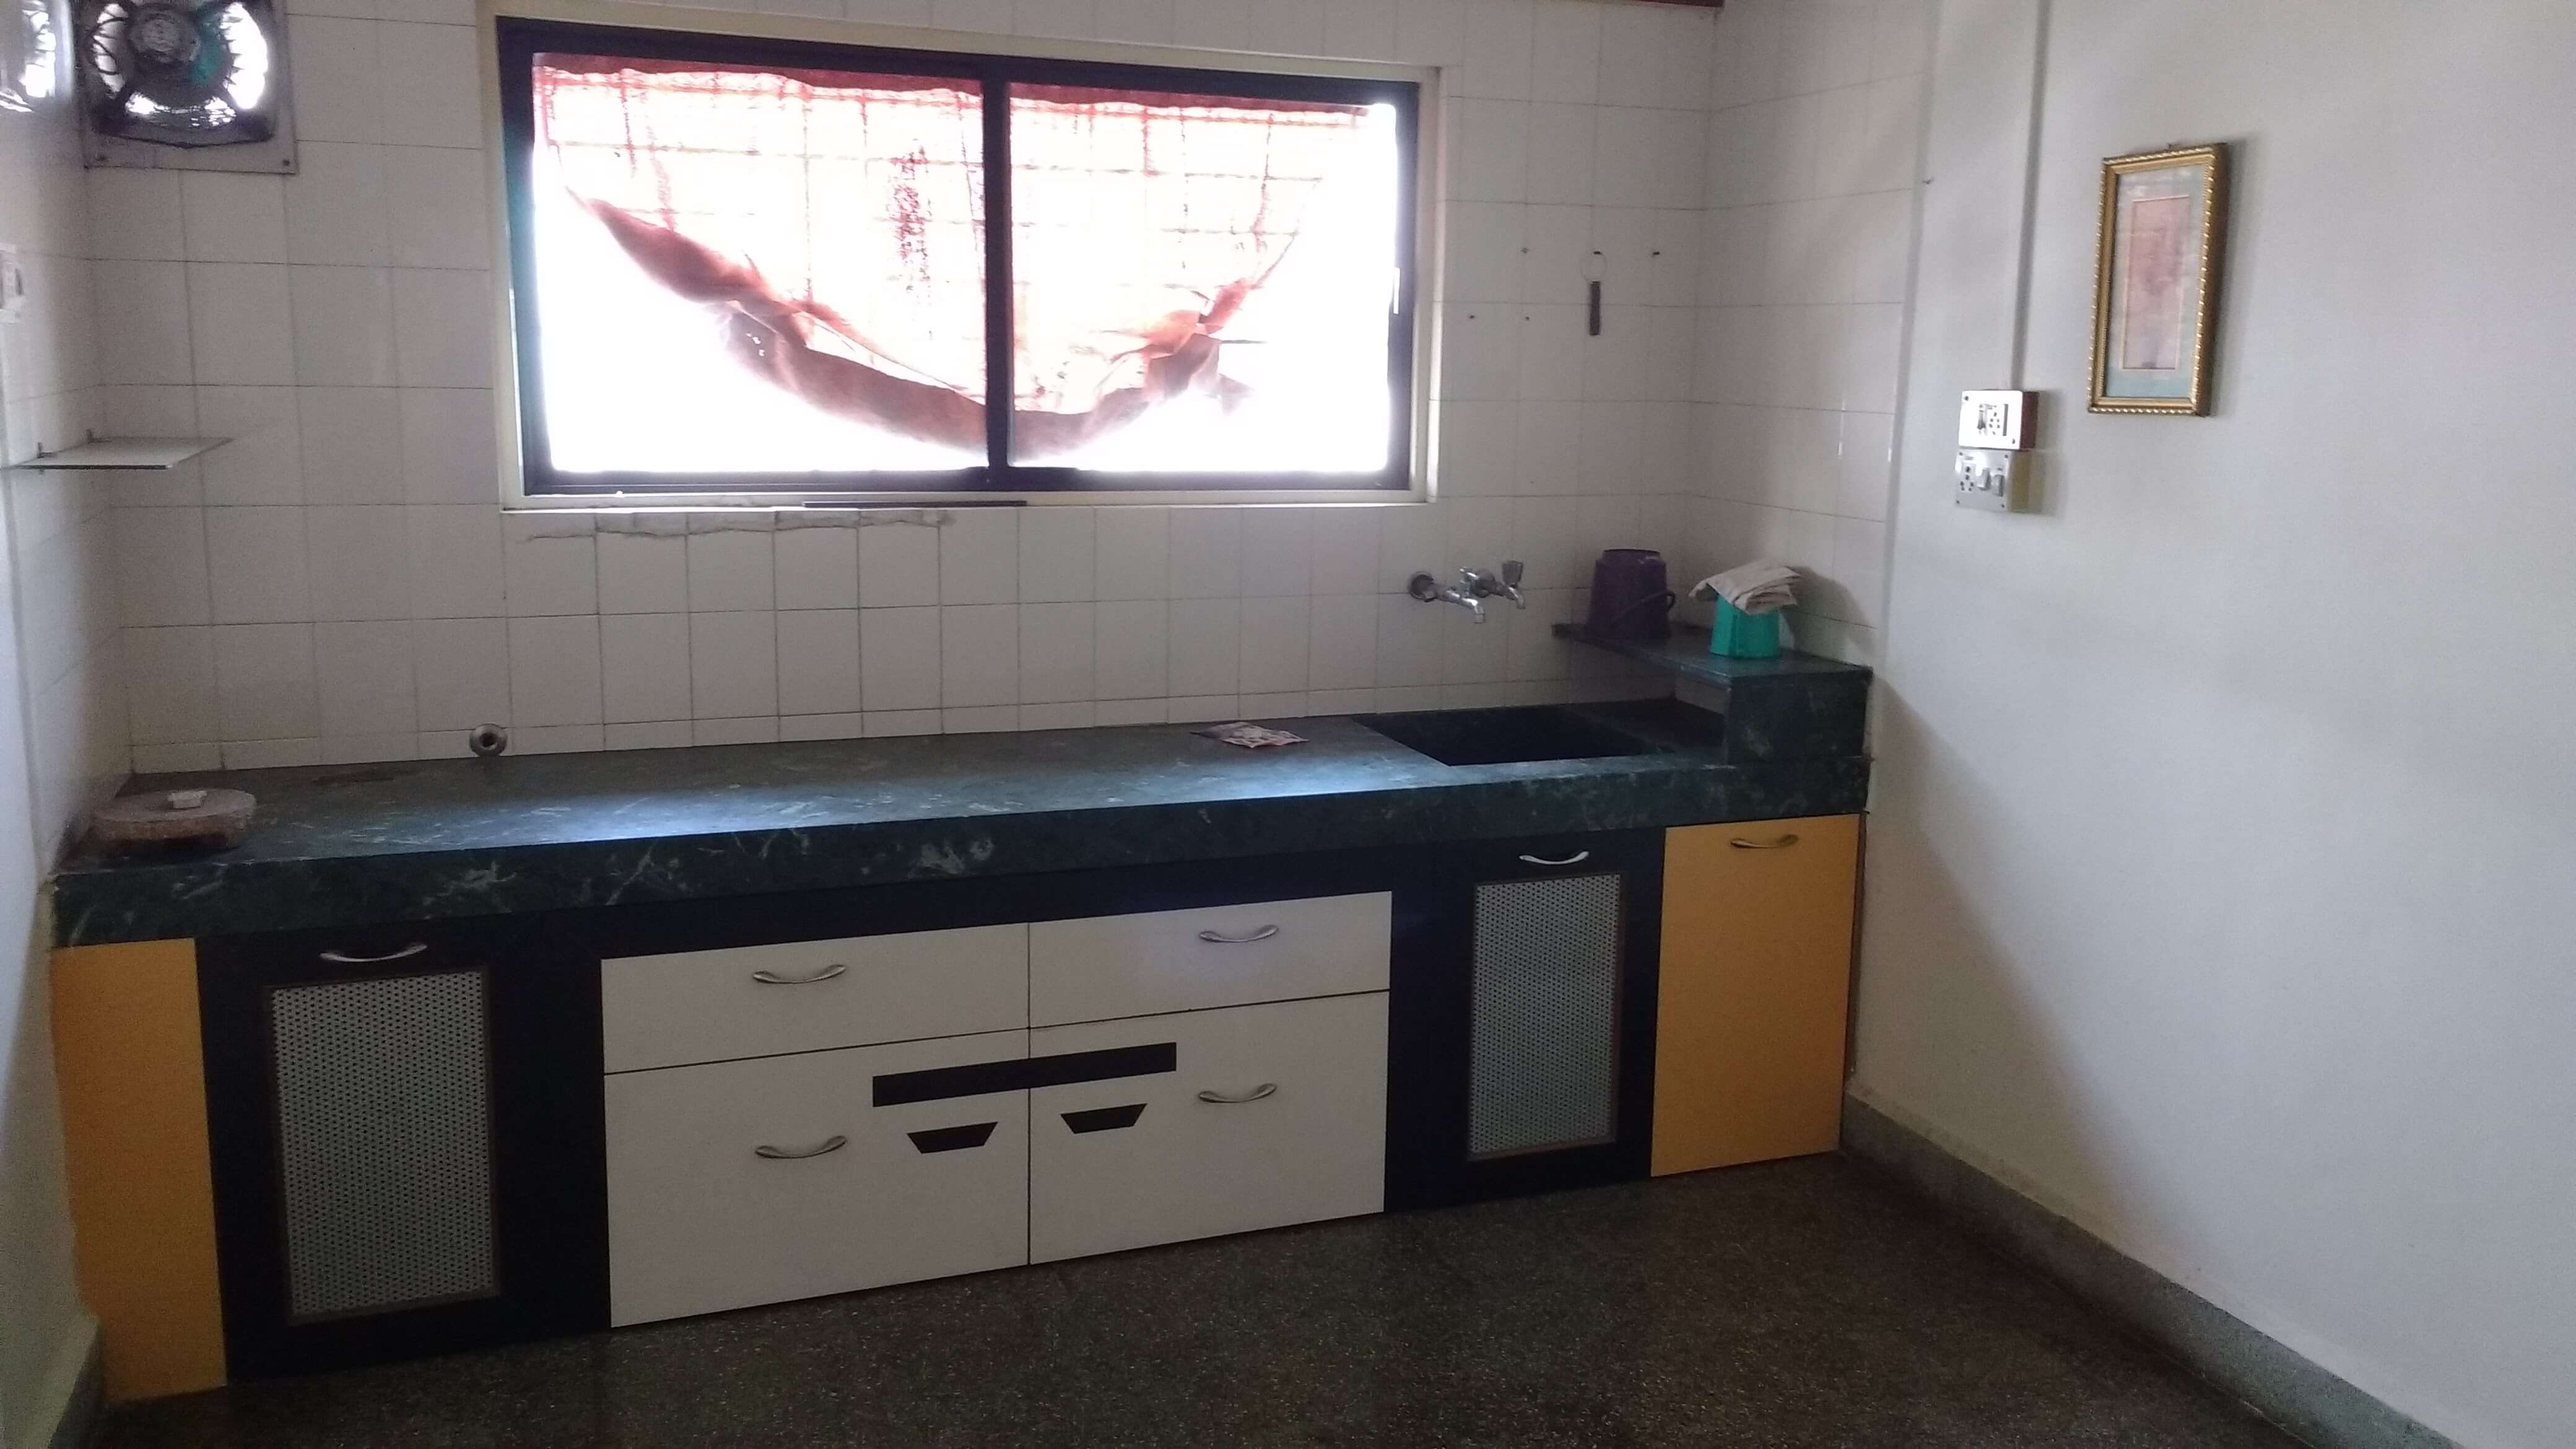 Two bed room flat on 2nd floor for rent very good location ,surrounded by bank ,subjji market , post office etc . 